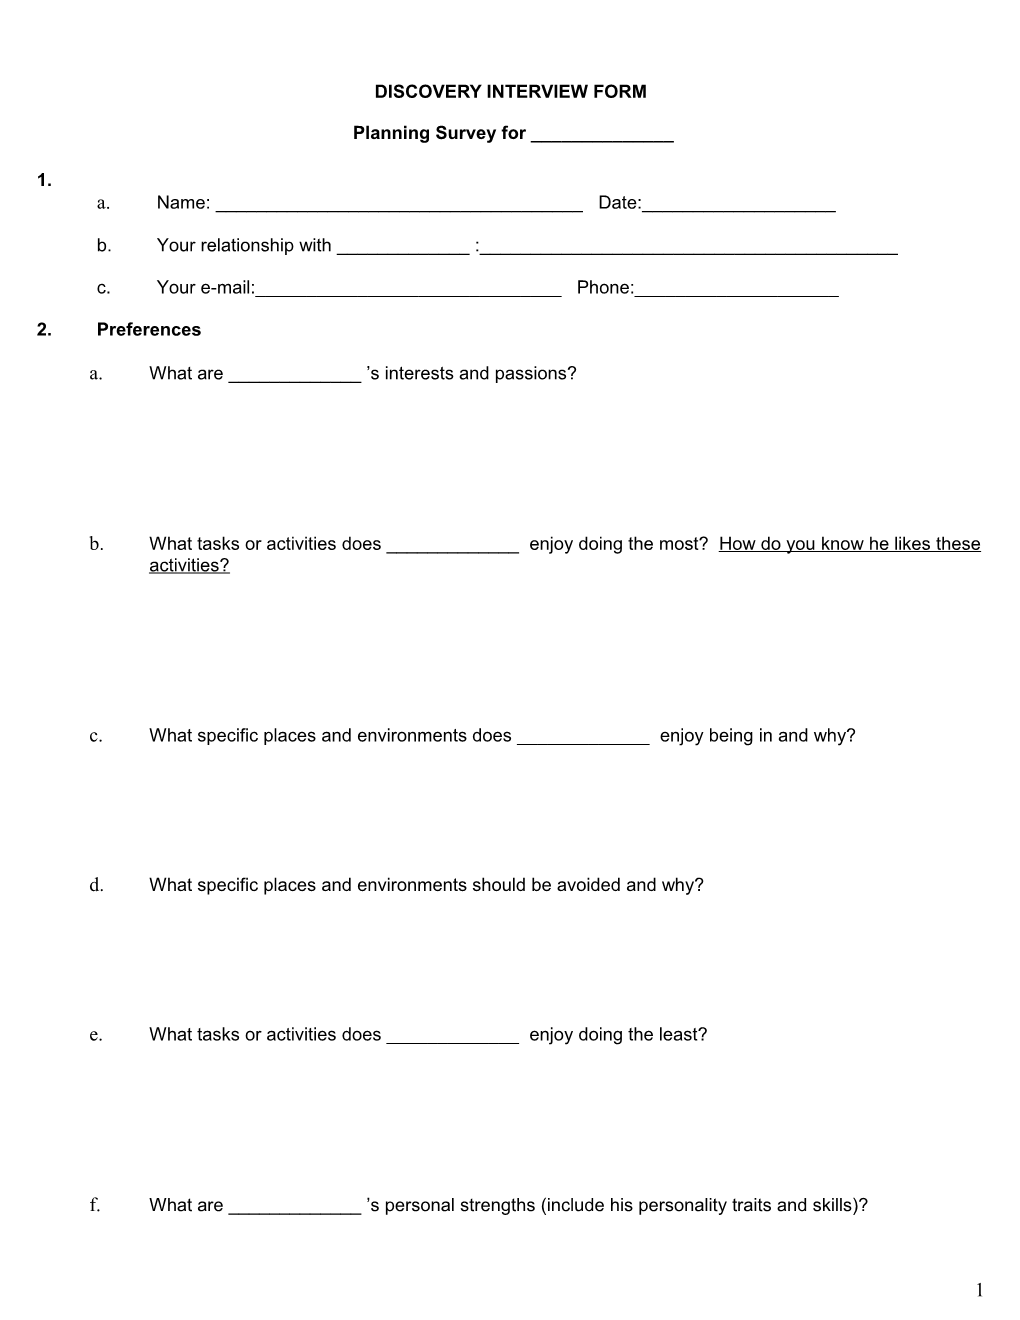 Discovery Interview Form